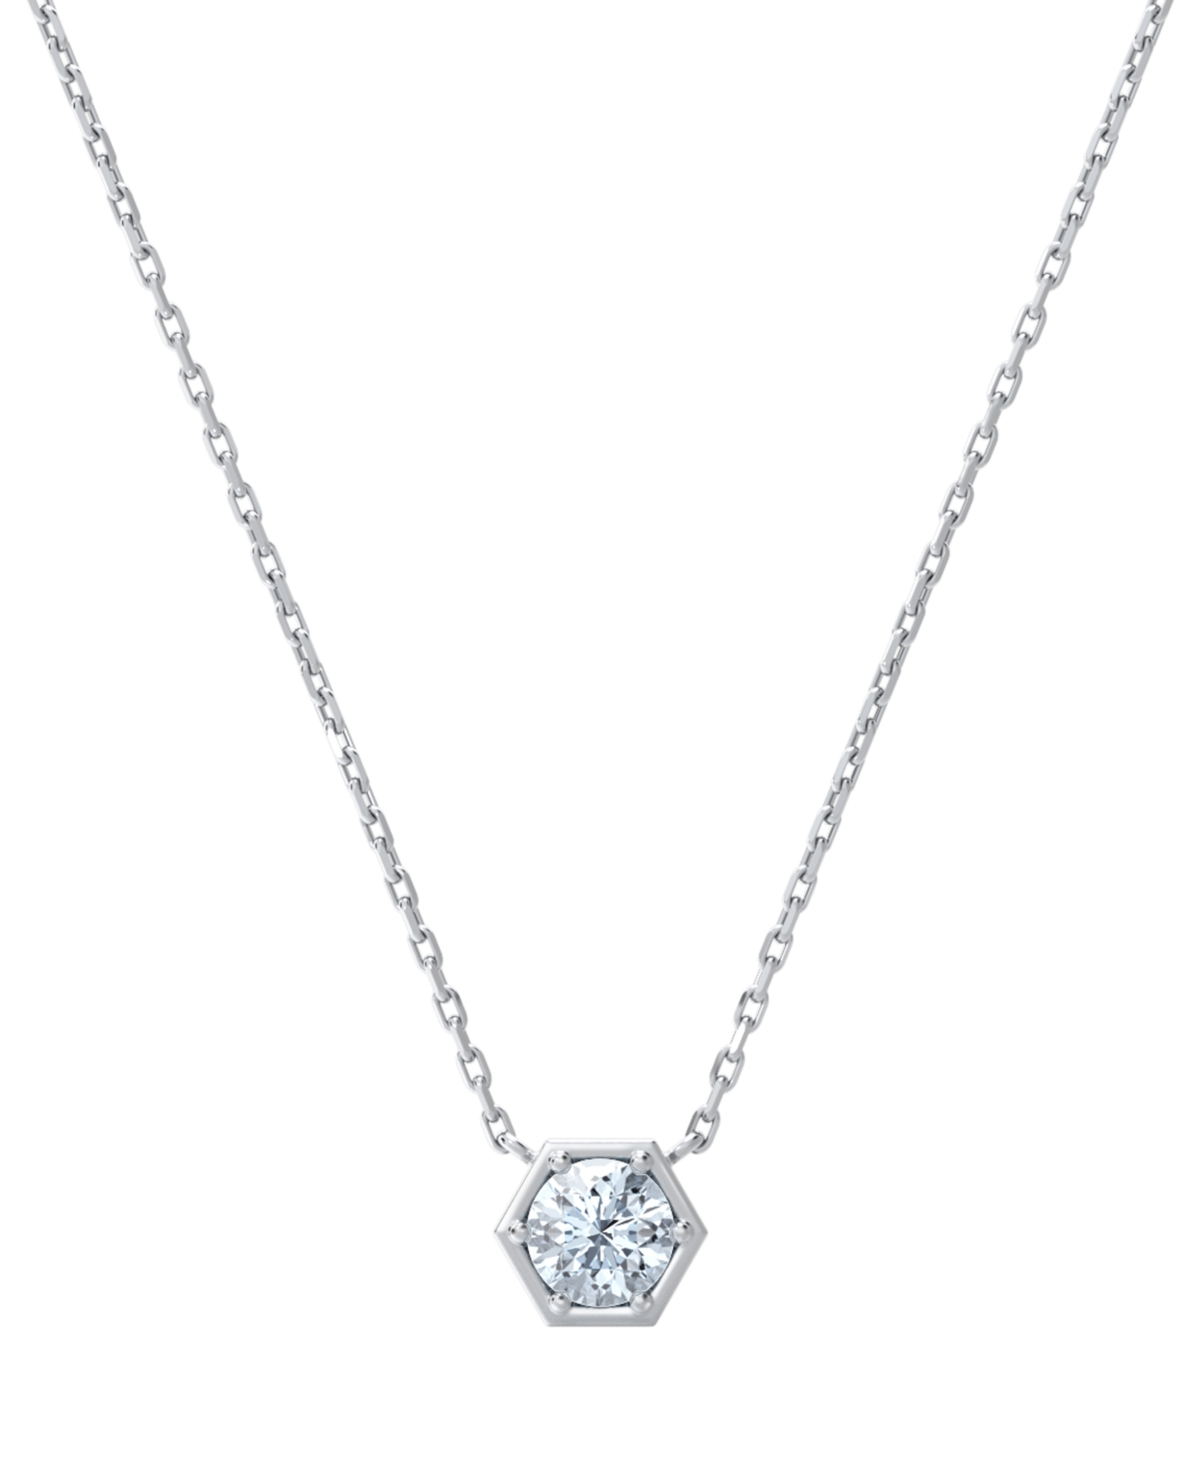 Portfolio by De Beers Forevermark Diamond Honeycomb Solitaire Pendant Necklace (1/2 ct. t.w.) in 14k White or Yellow Gold, 16" + 2" extender - White G